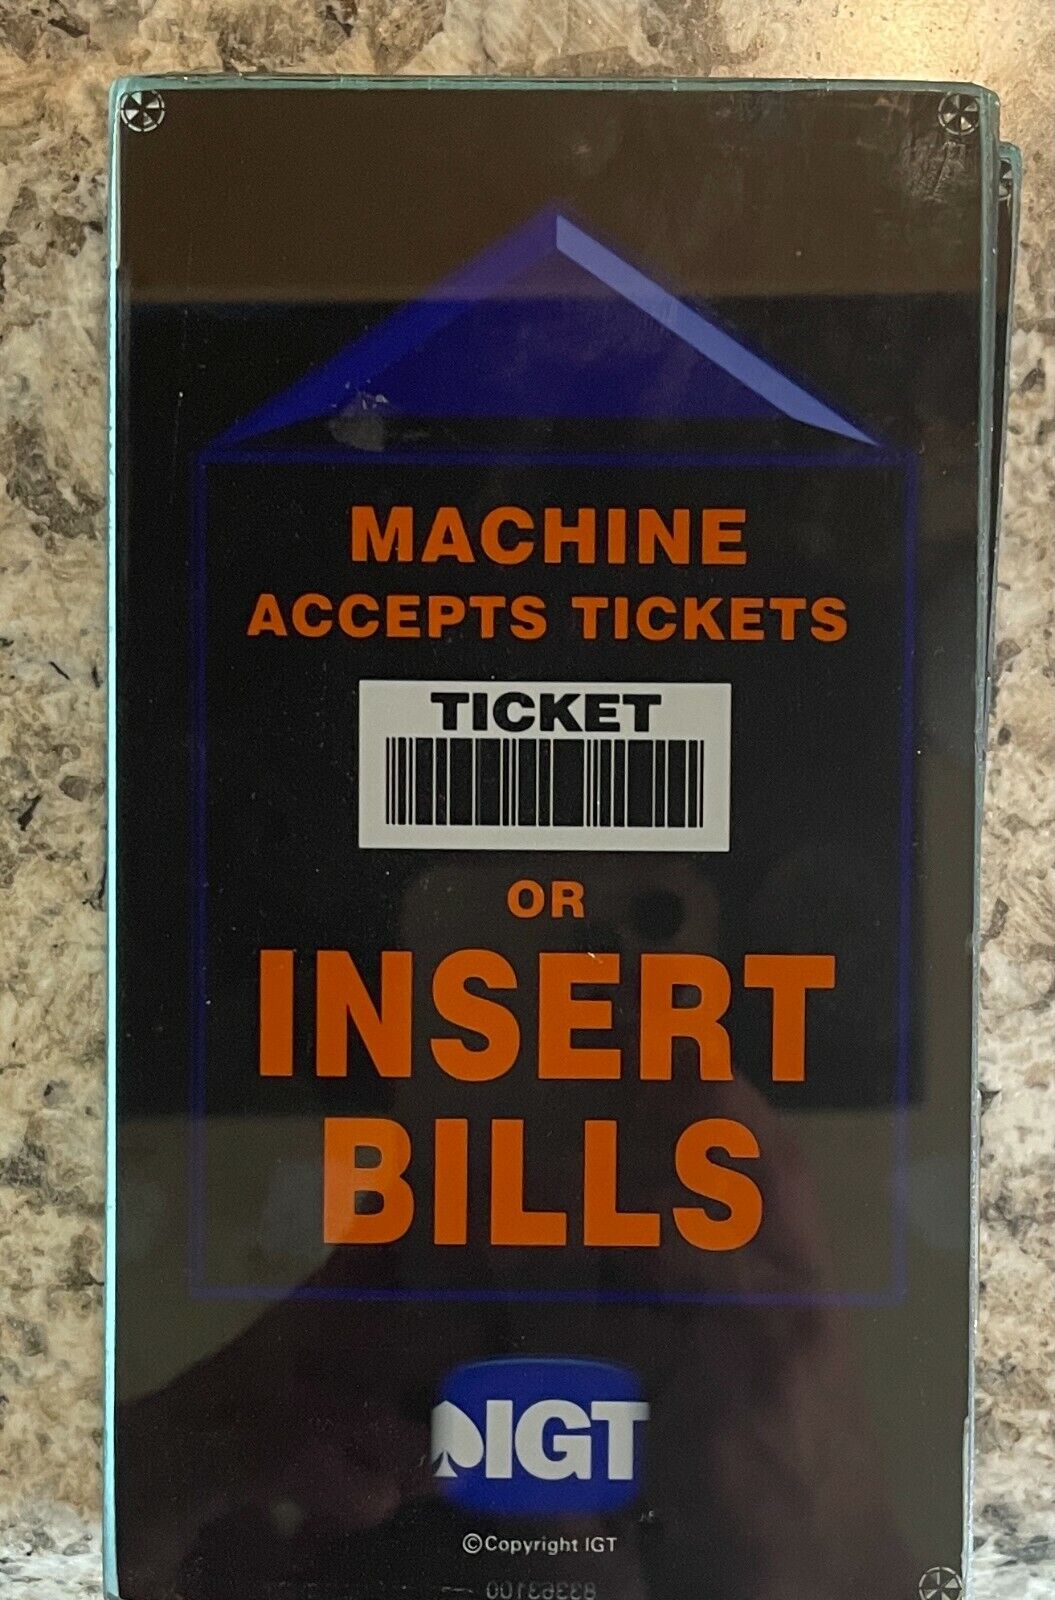 IGT Slant Top Side Glass MACHINE ACCEPTS TICKETS OR INSERT BILLS